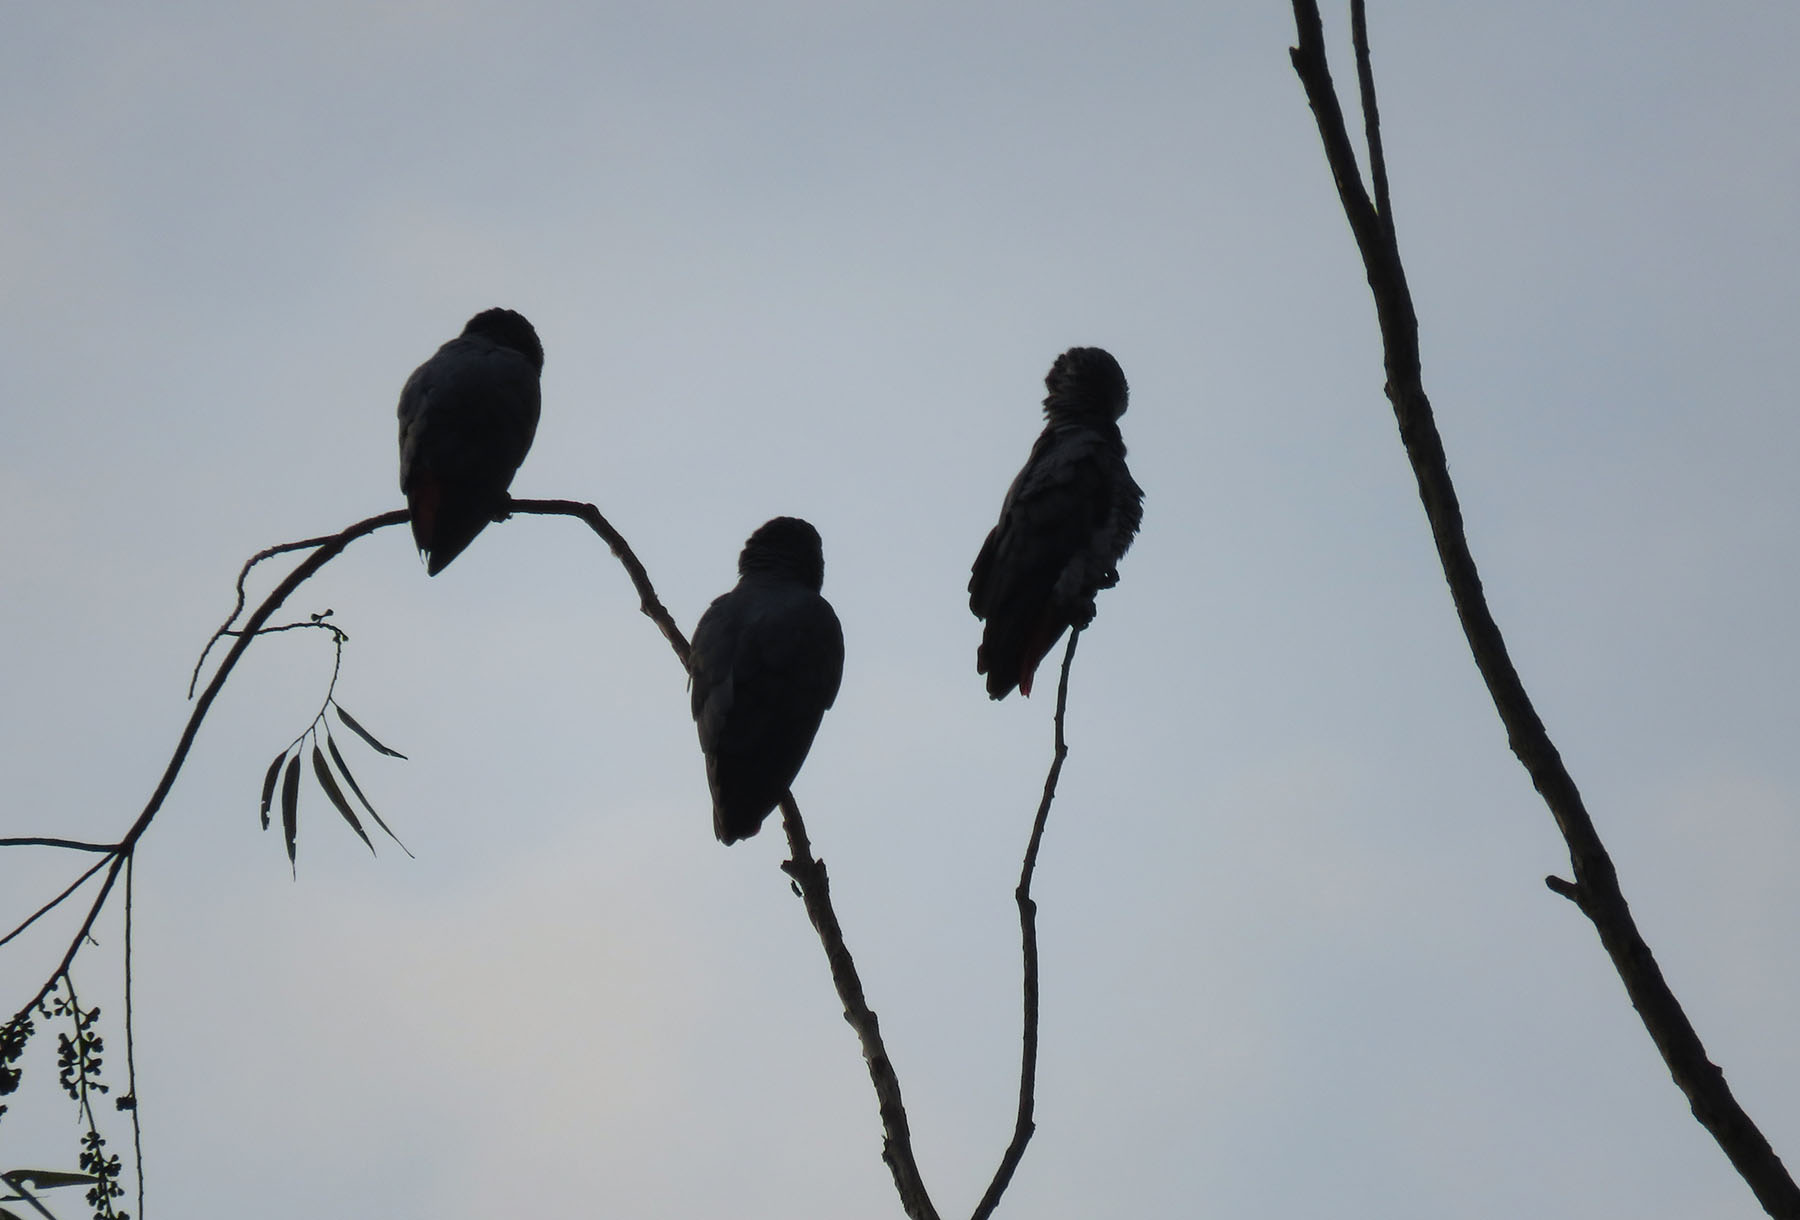 Grey parrots perch high up in the trees waiting for the sun, 2022